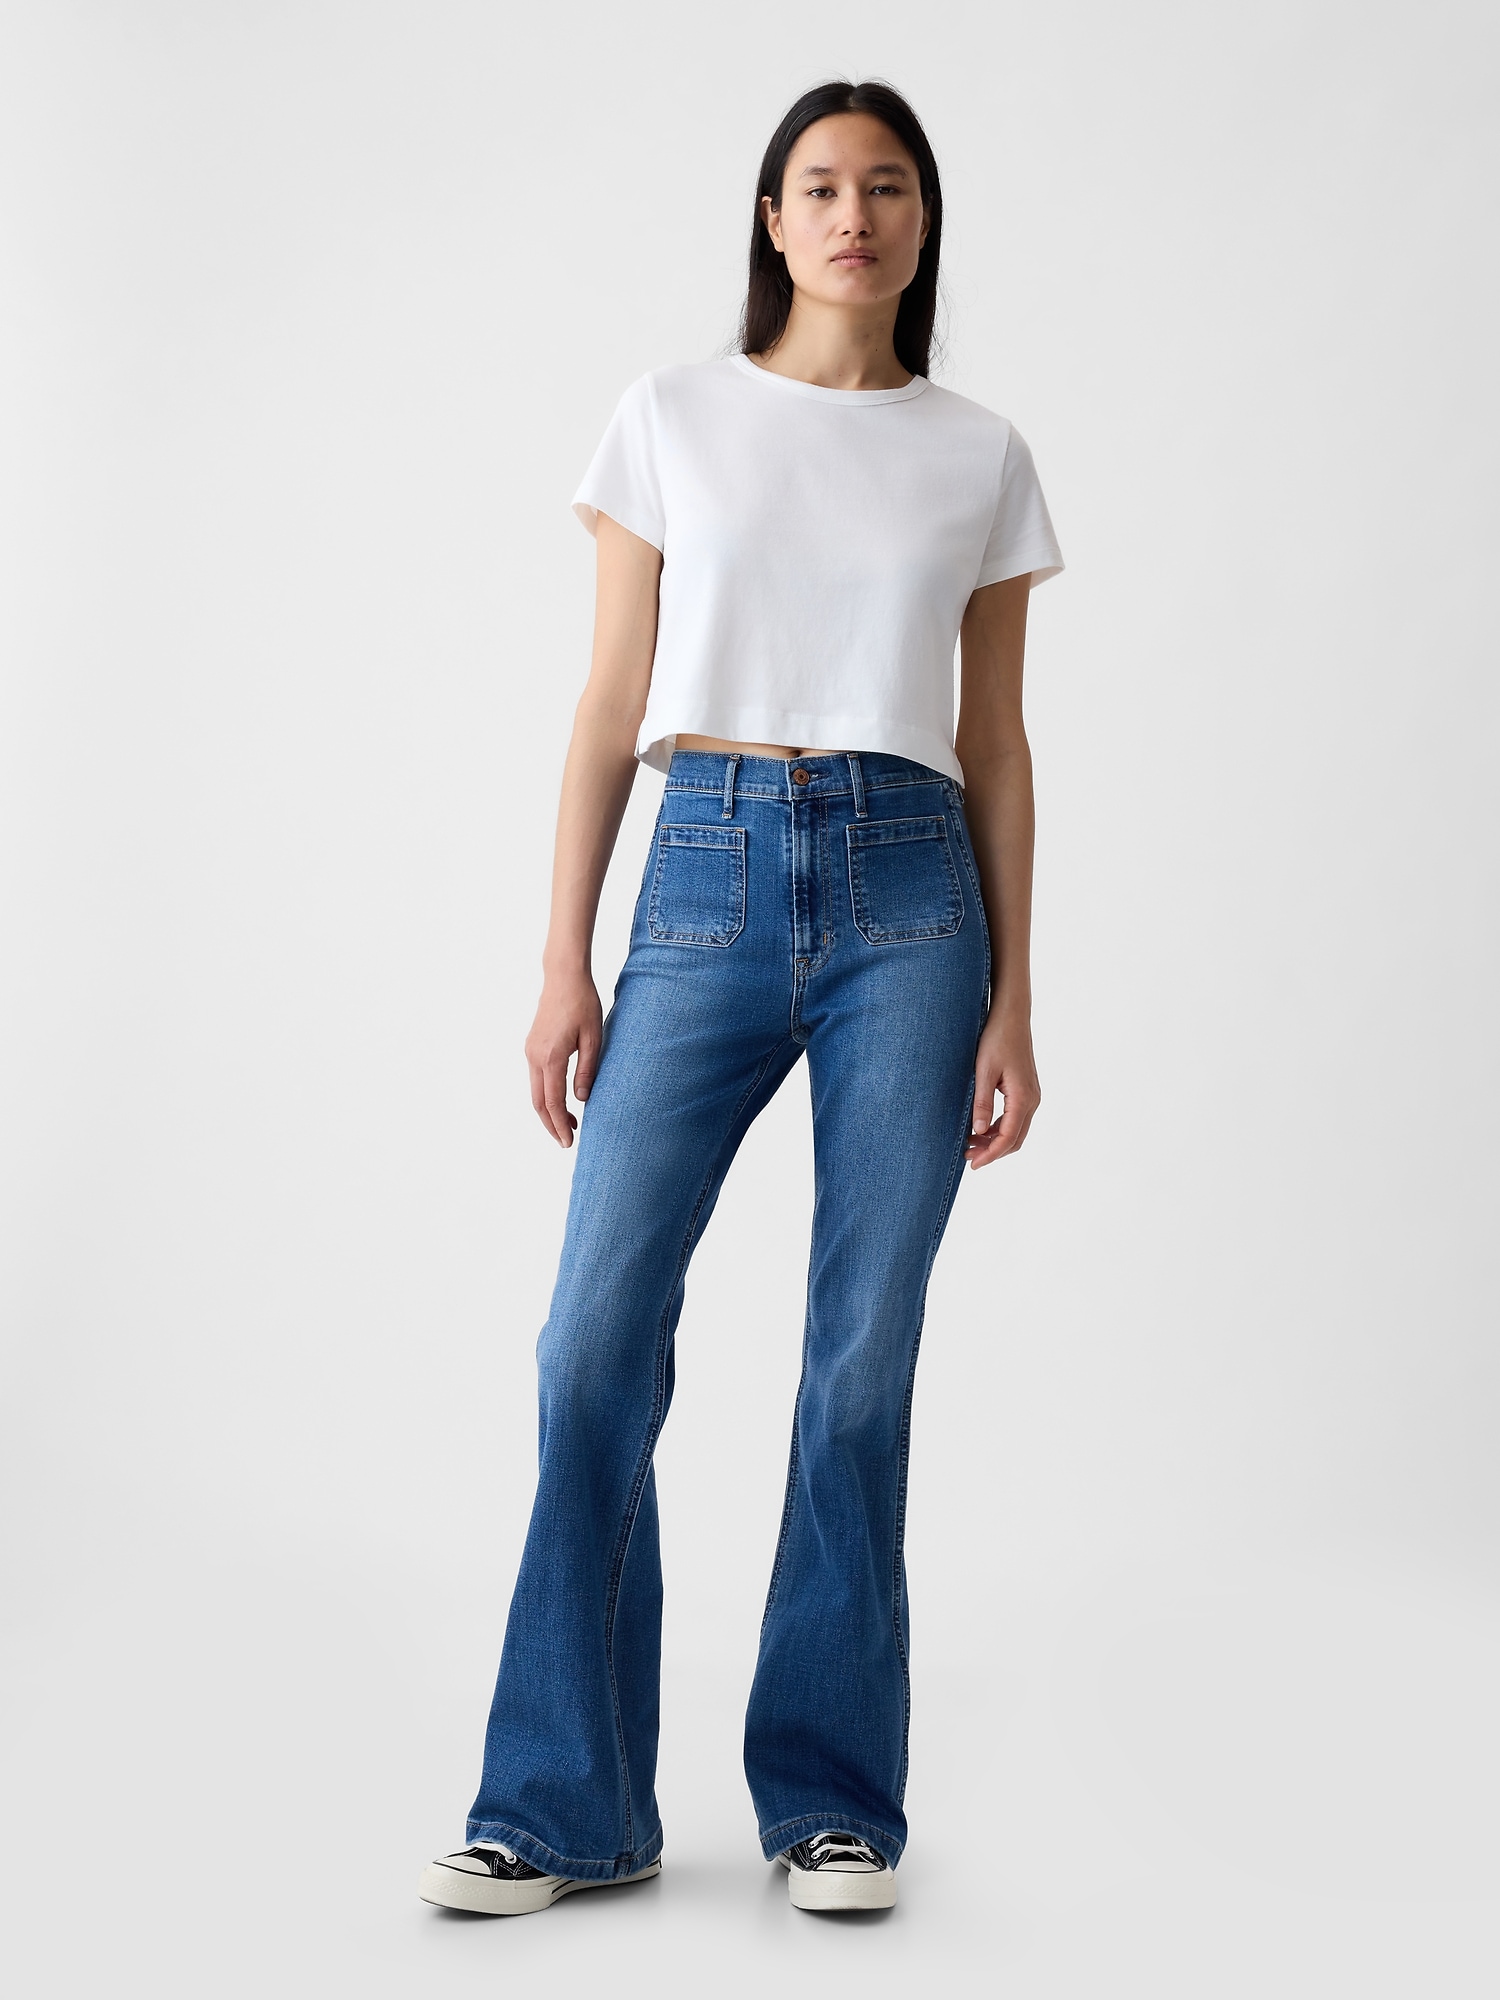 Buy Gap Light Wash Blue High Waisted 70's Flared Jeans from the